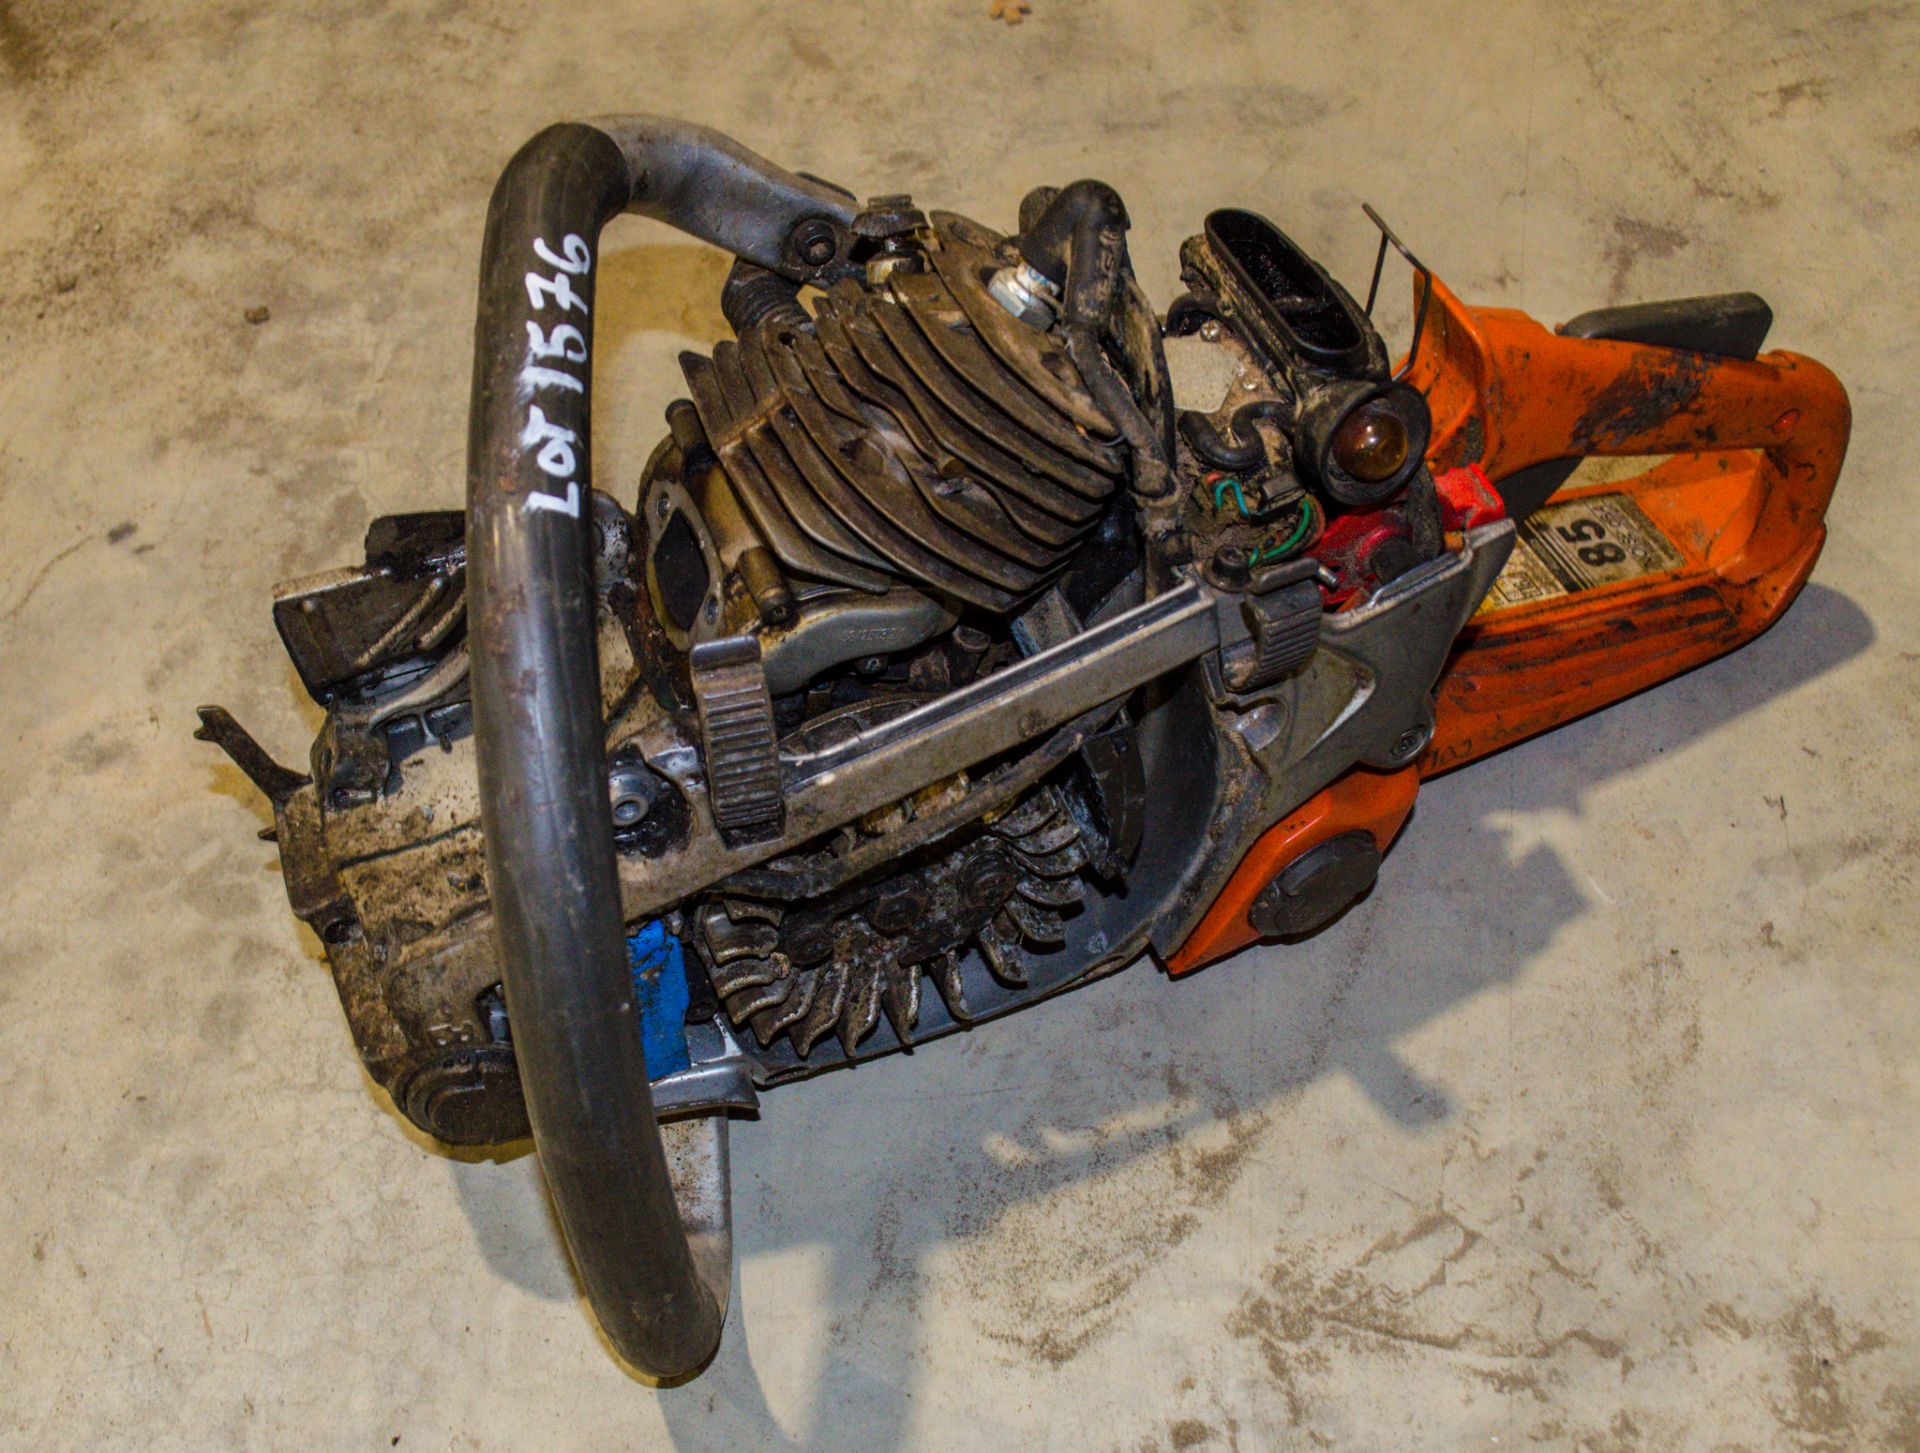 Husqvarna petrol driven chainsaw for spares 19020323 ** Dismantled & parts missing **